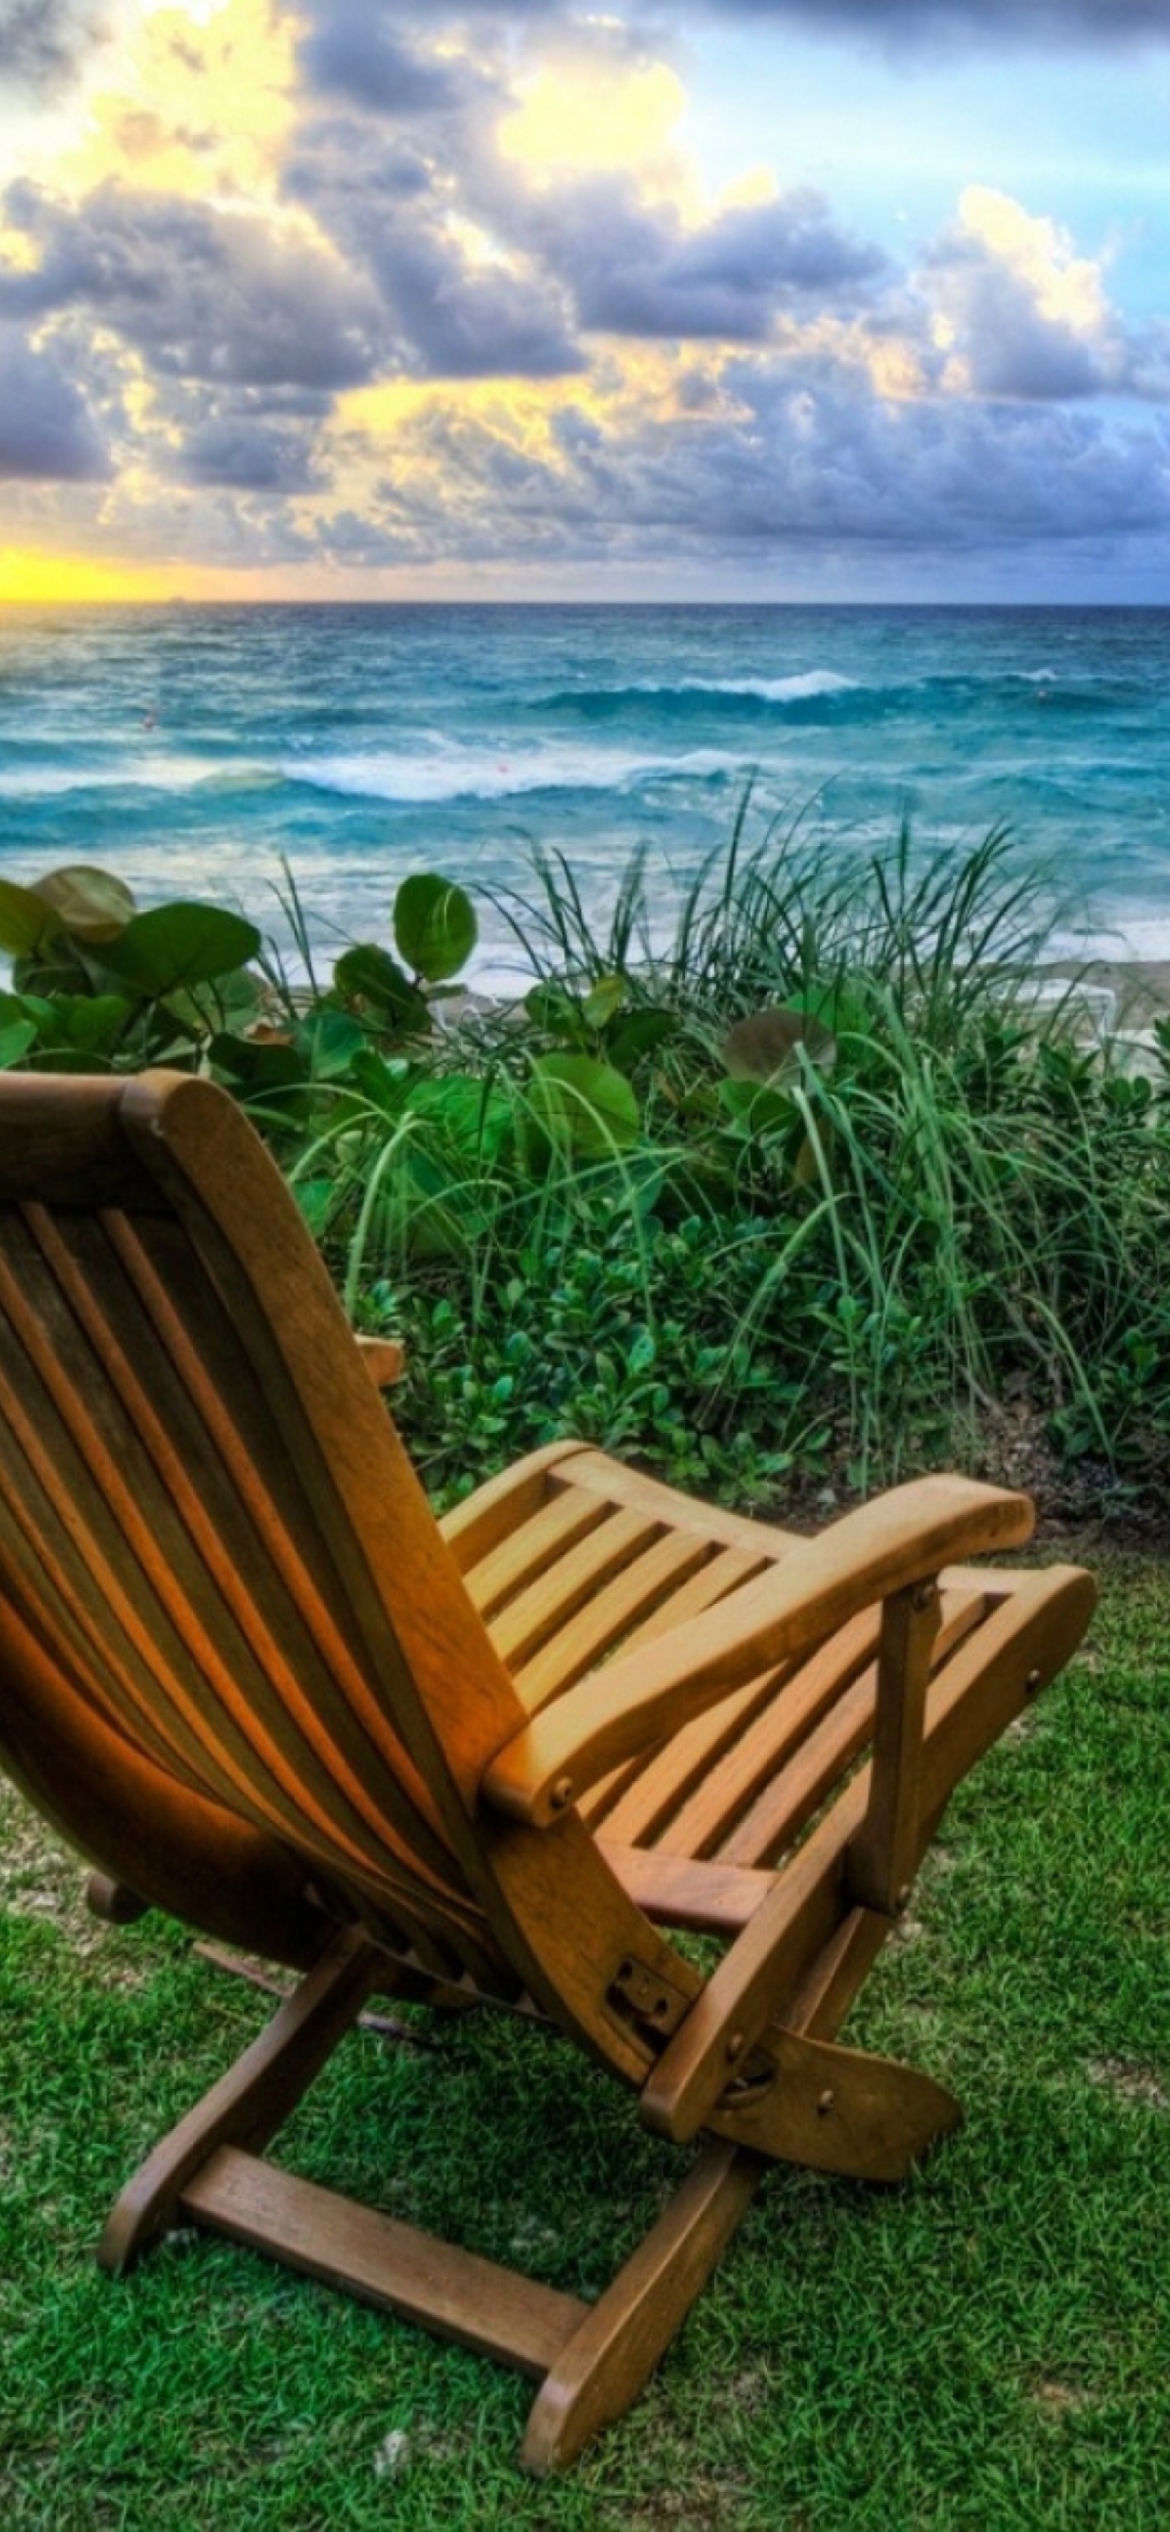 Das Chairs With Sea View Wallpaper 1170x2532